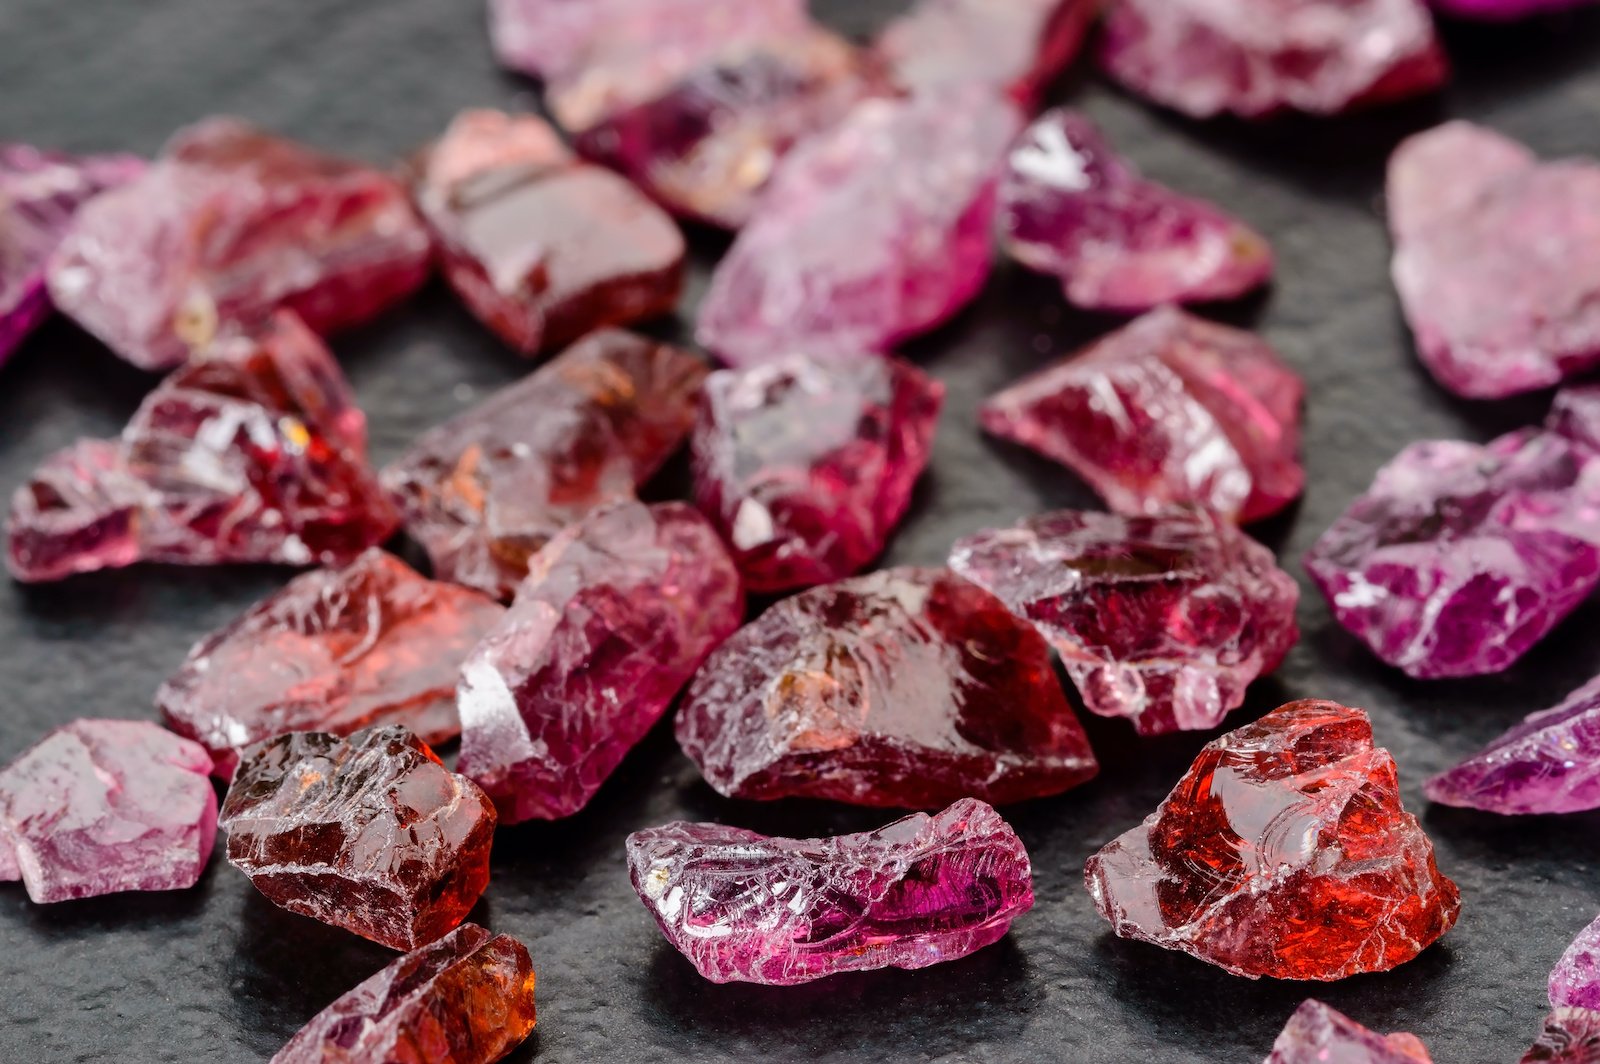 A collection of raw garnet stones